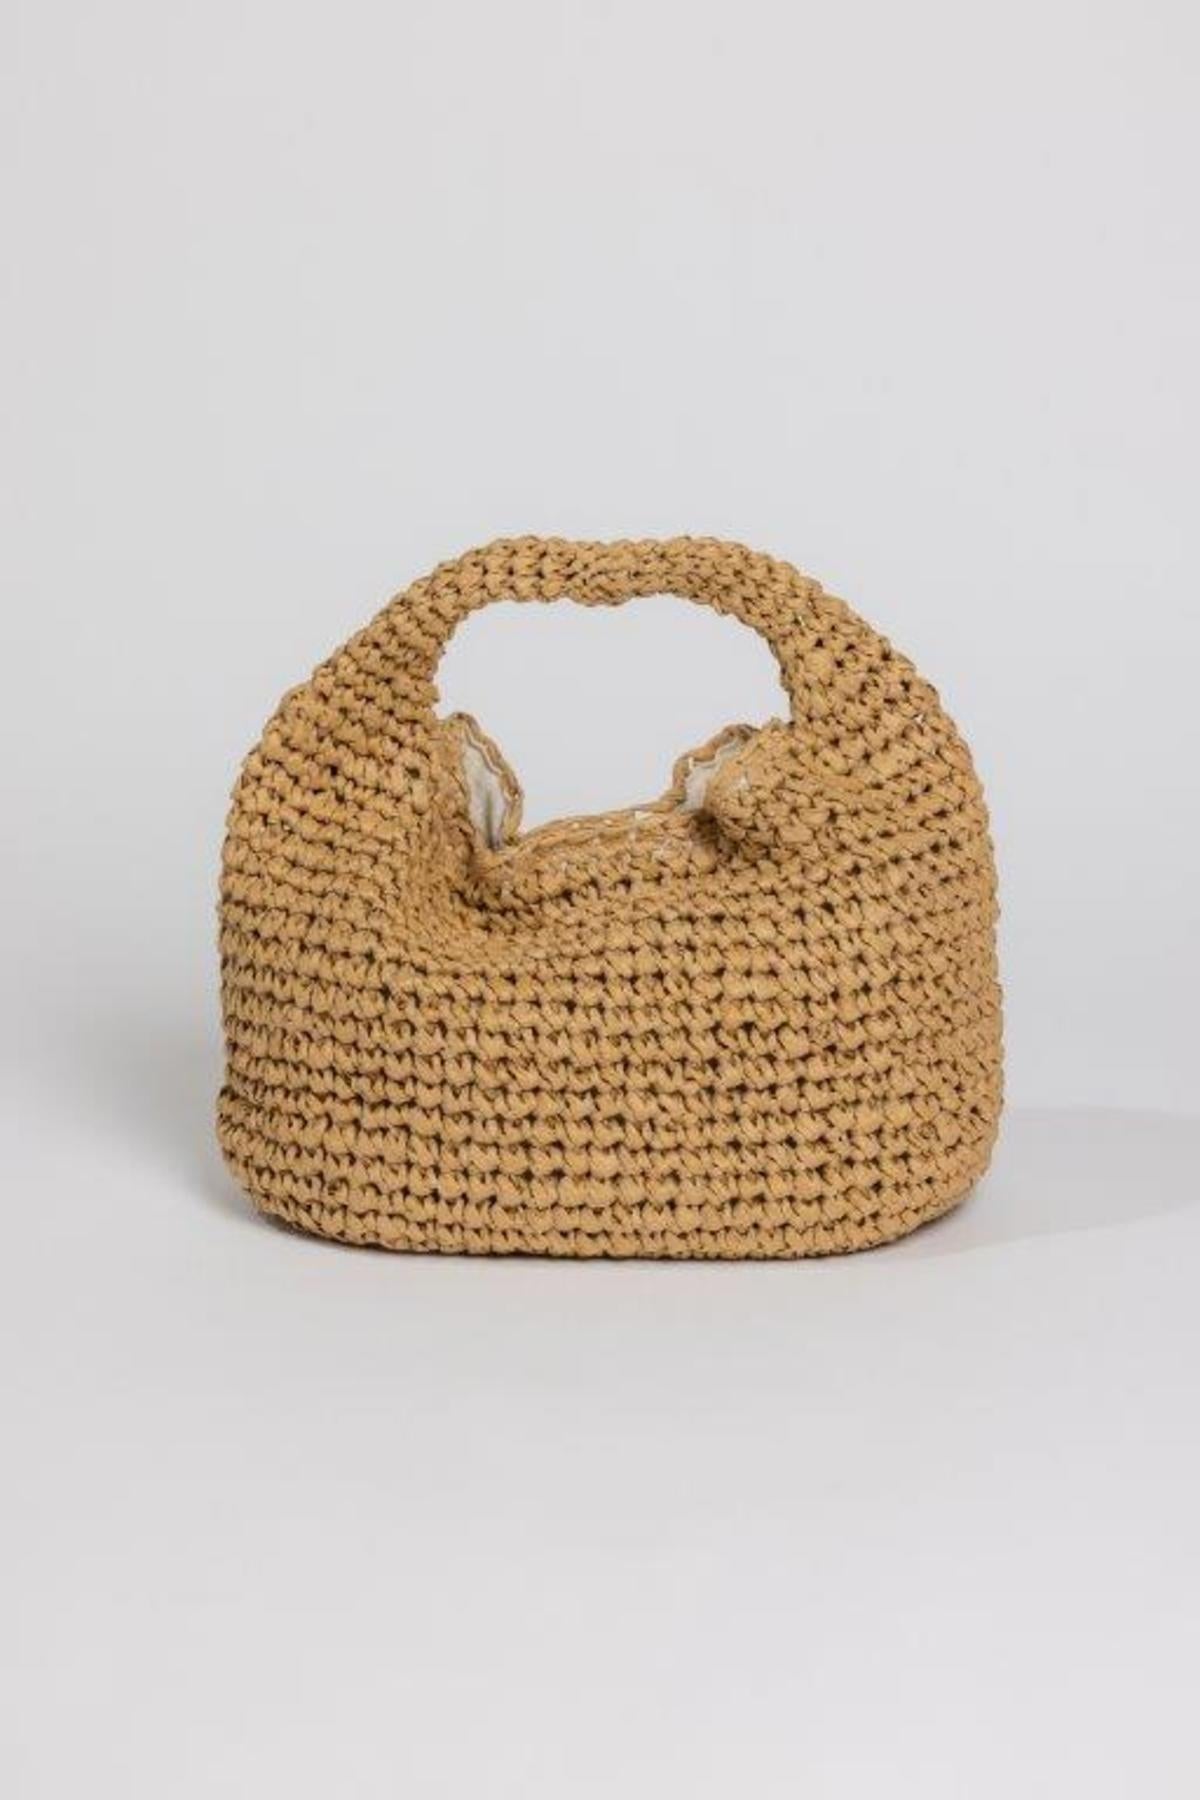   A small, hand-woven paper straw Slouch Bag by Velvet by Graham & Spencer with a rounded shape and integrated handle, displayed against a plain, light background. 